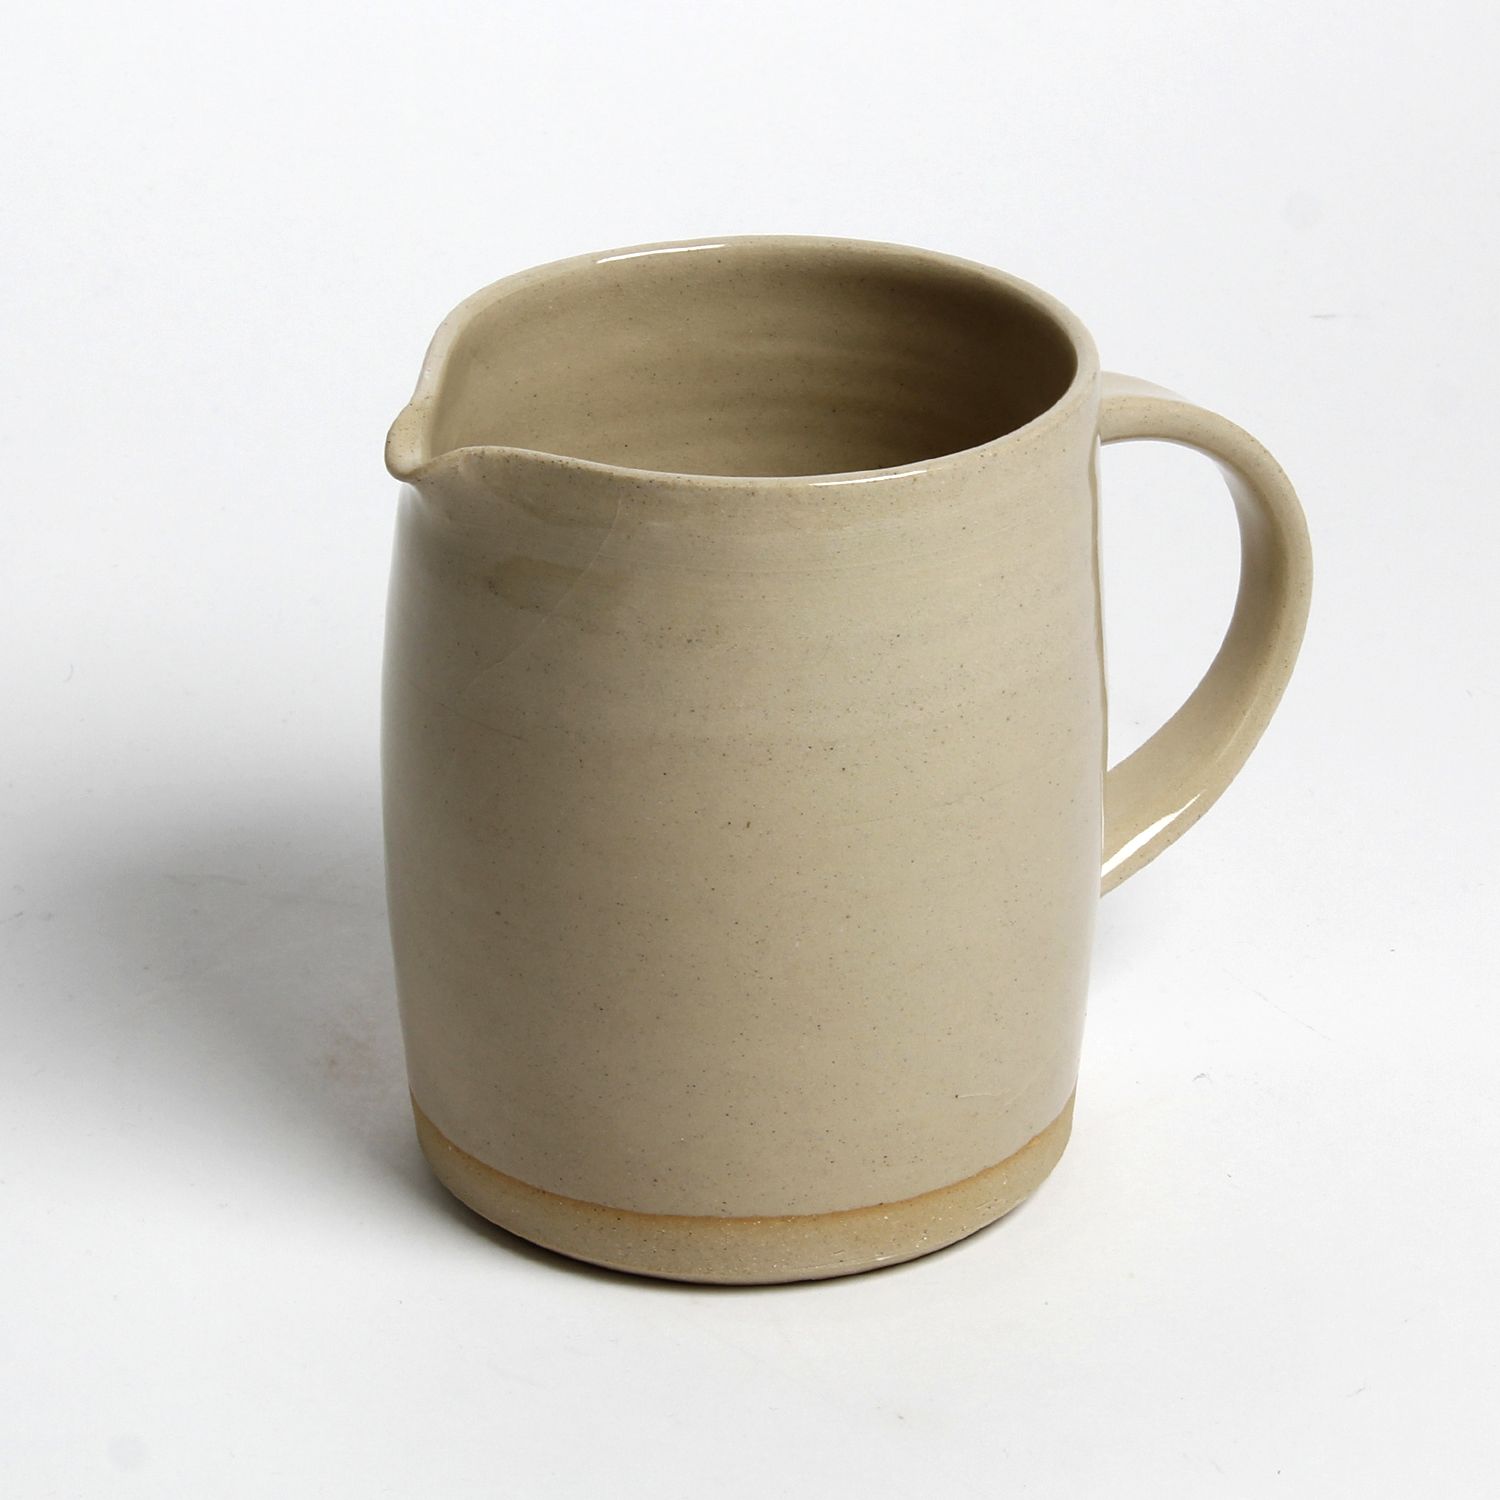 Suzanne Morrisette: Wet Pebble Pitcher Product Image 2 of 2